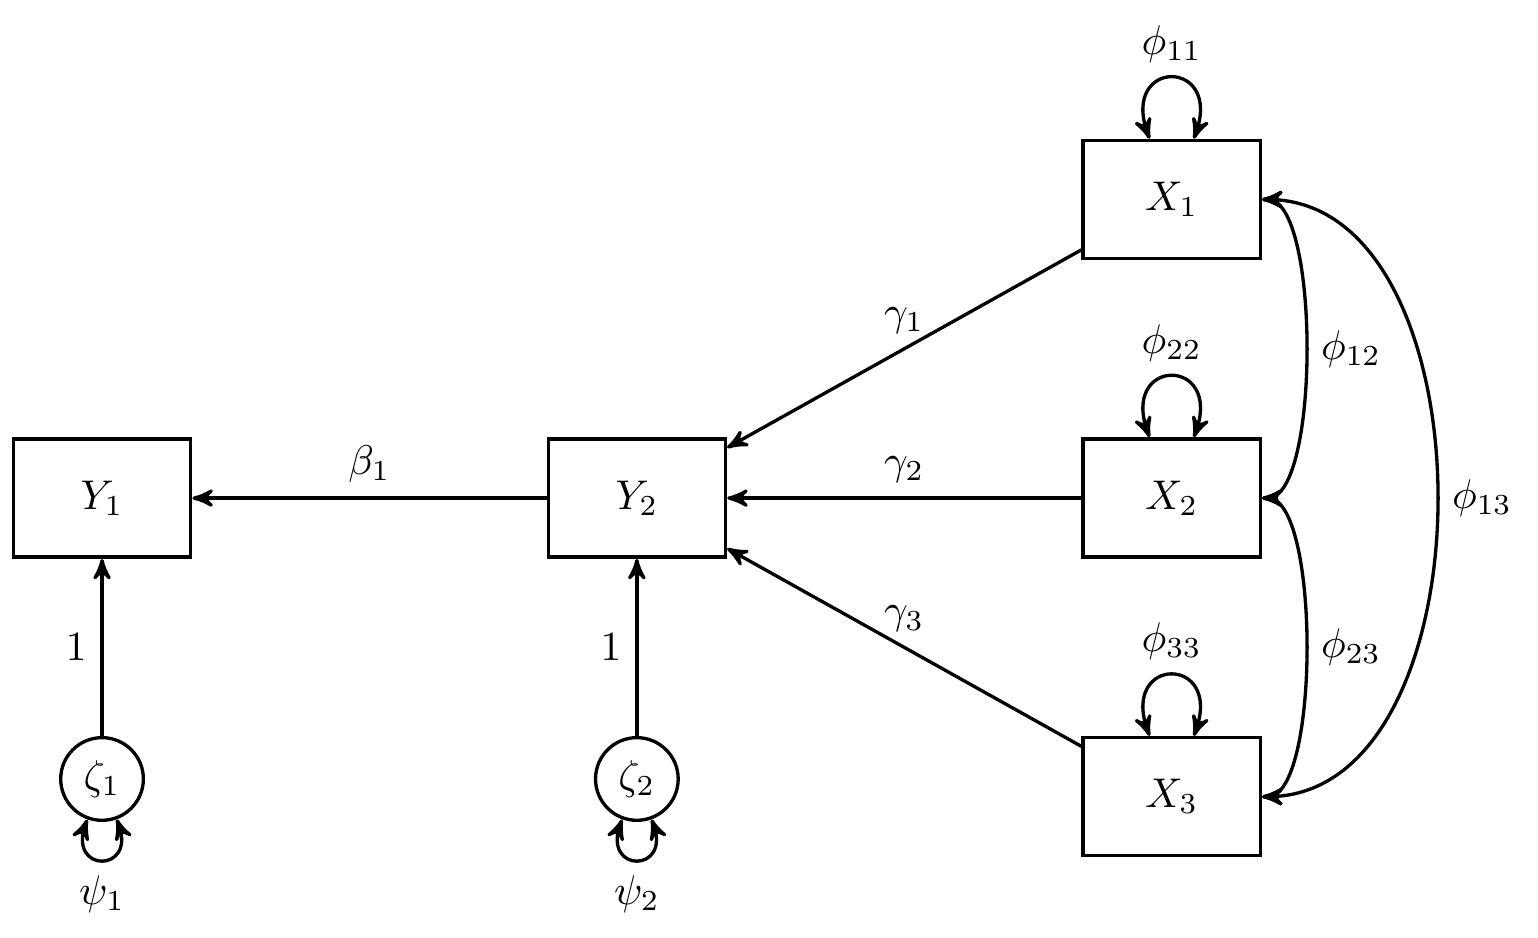 Mediation Model (Covariance Structure)